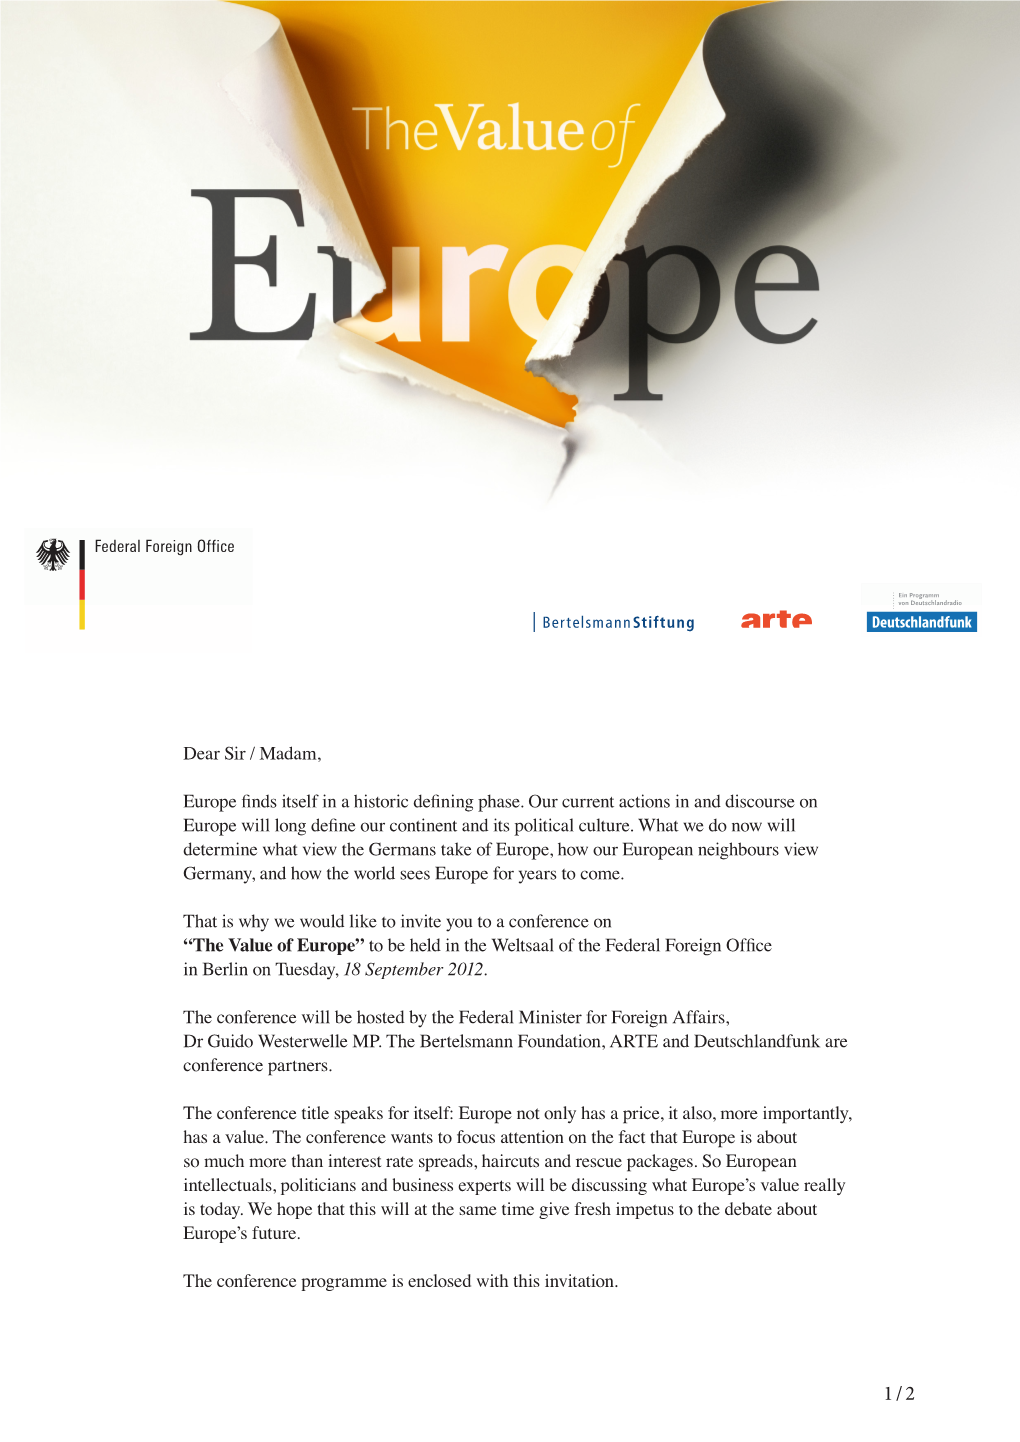 Dear Sir / Madam, Europe Finds Itself in a Historic Defining Phase. Our